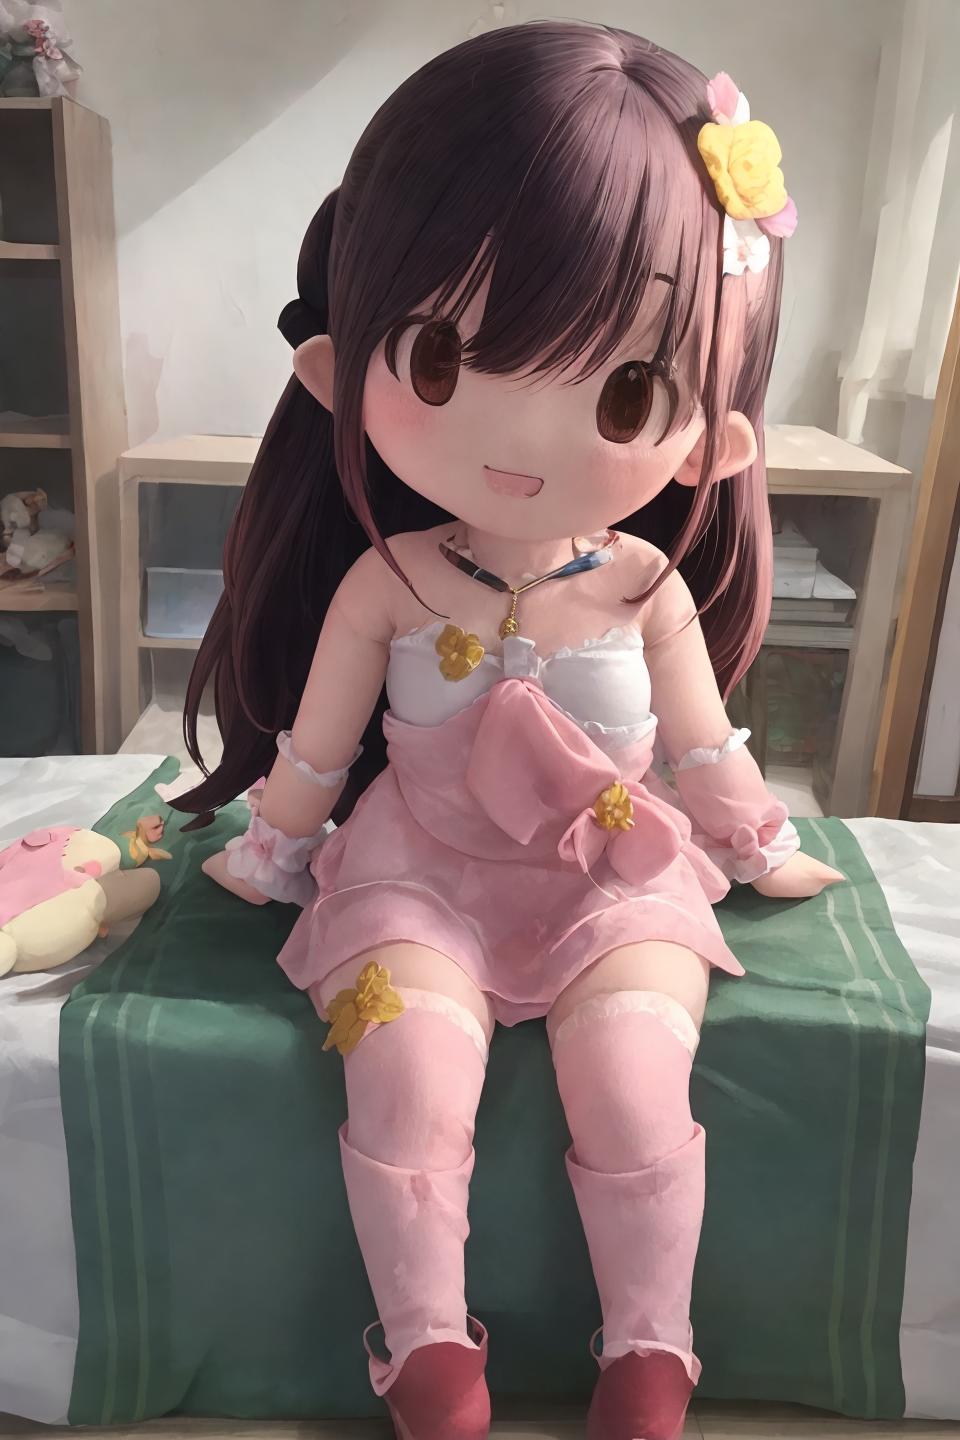 fufu doll (realistic+anime) image by CityEdge